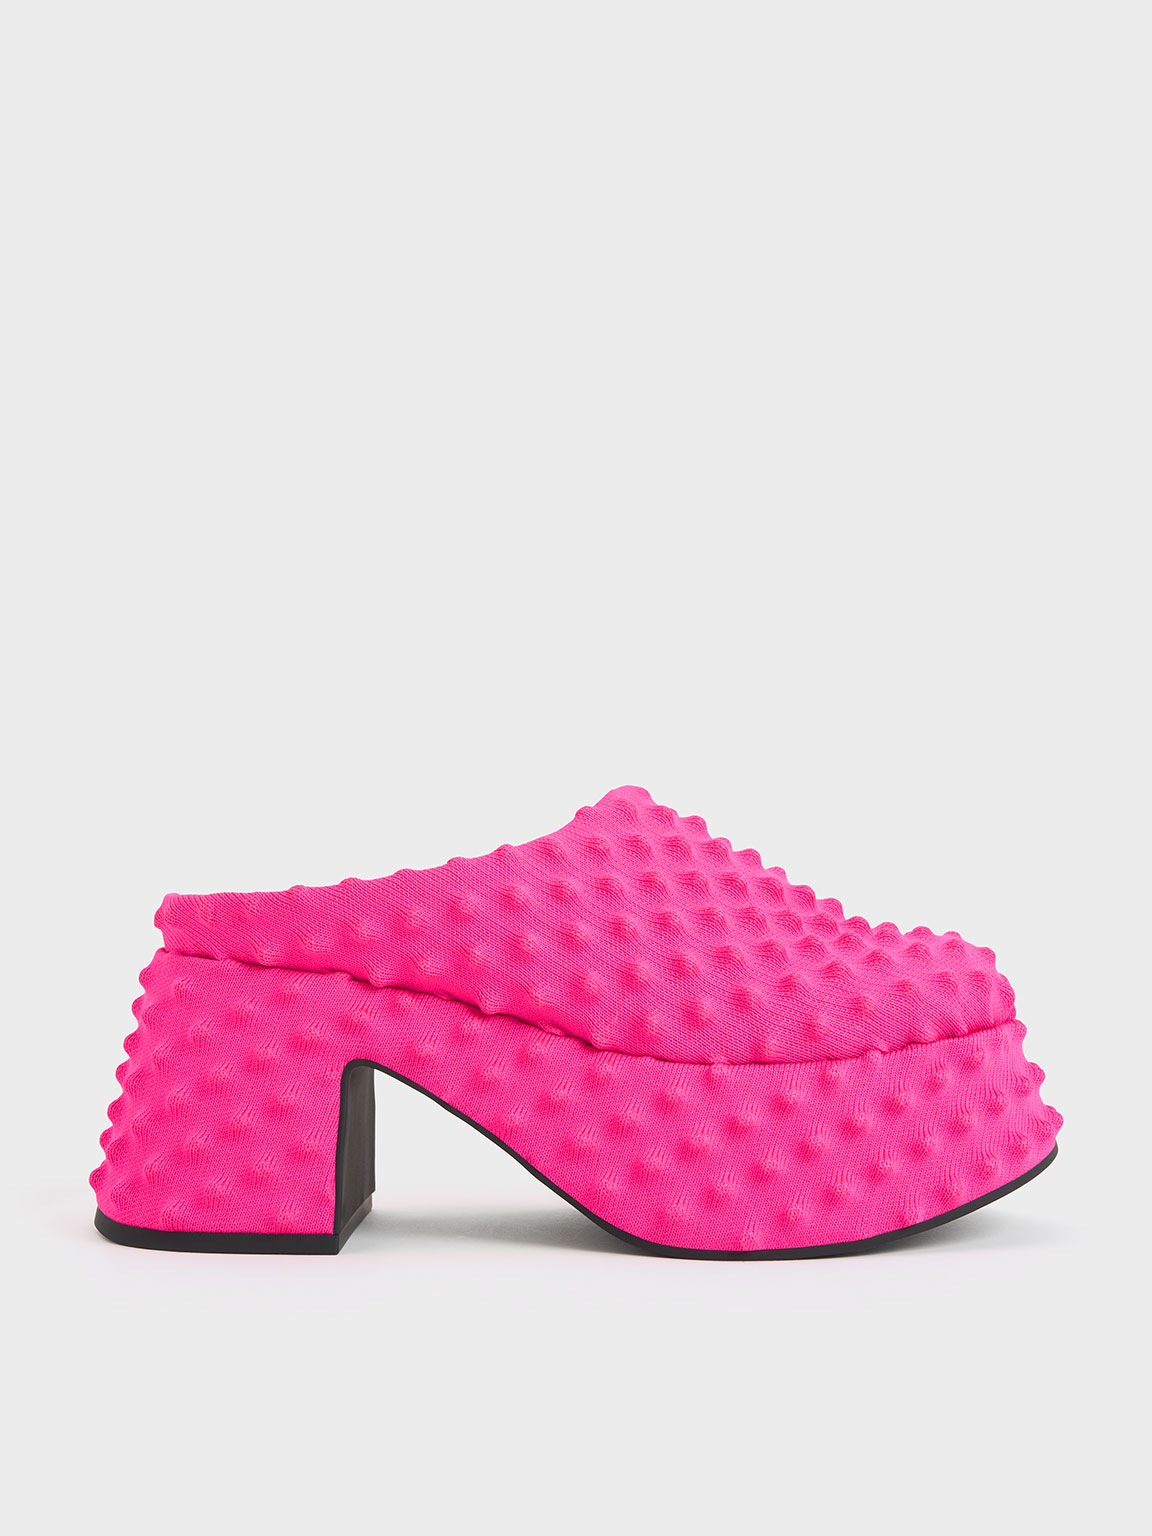 Charles & Keith Spike Textured Platform Mules In Fuchsia